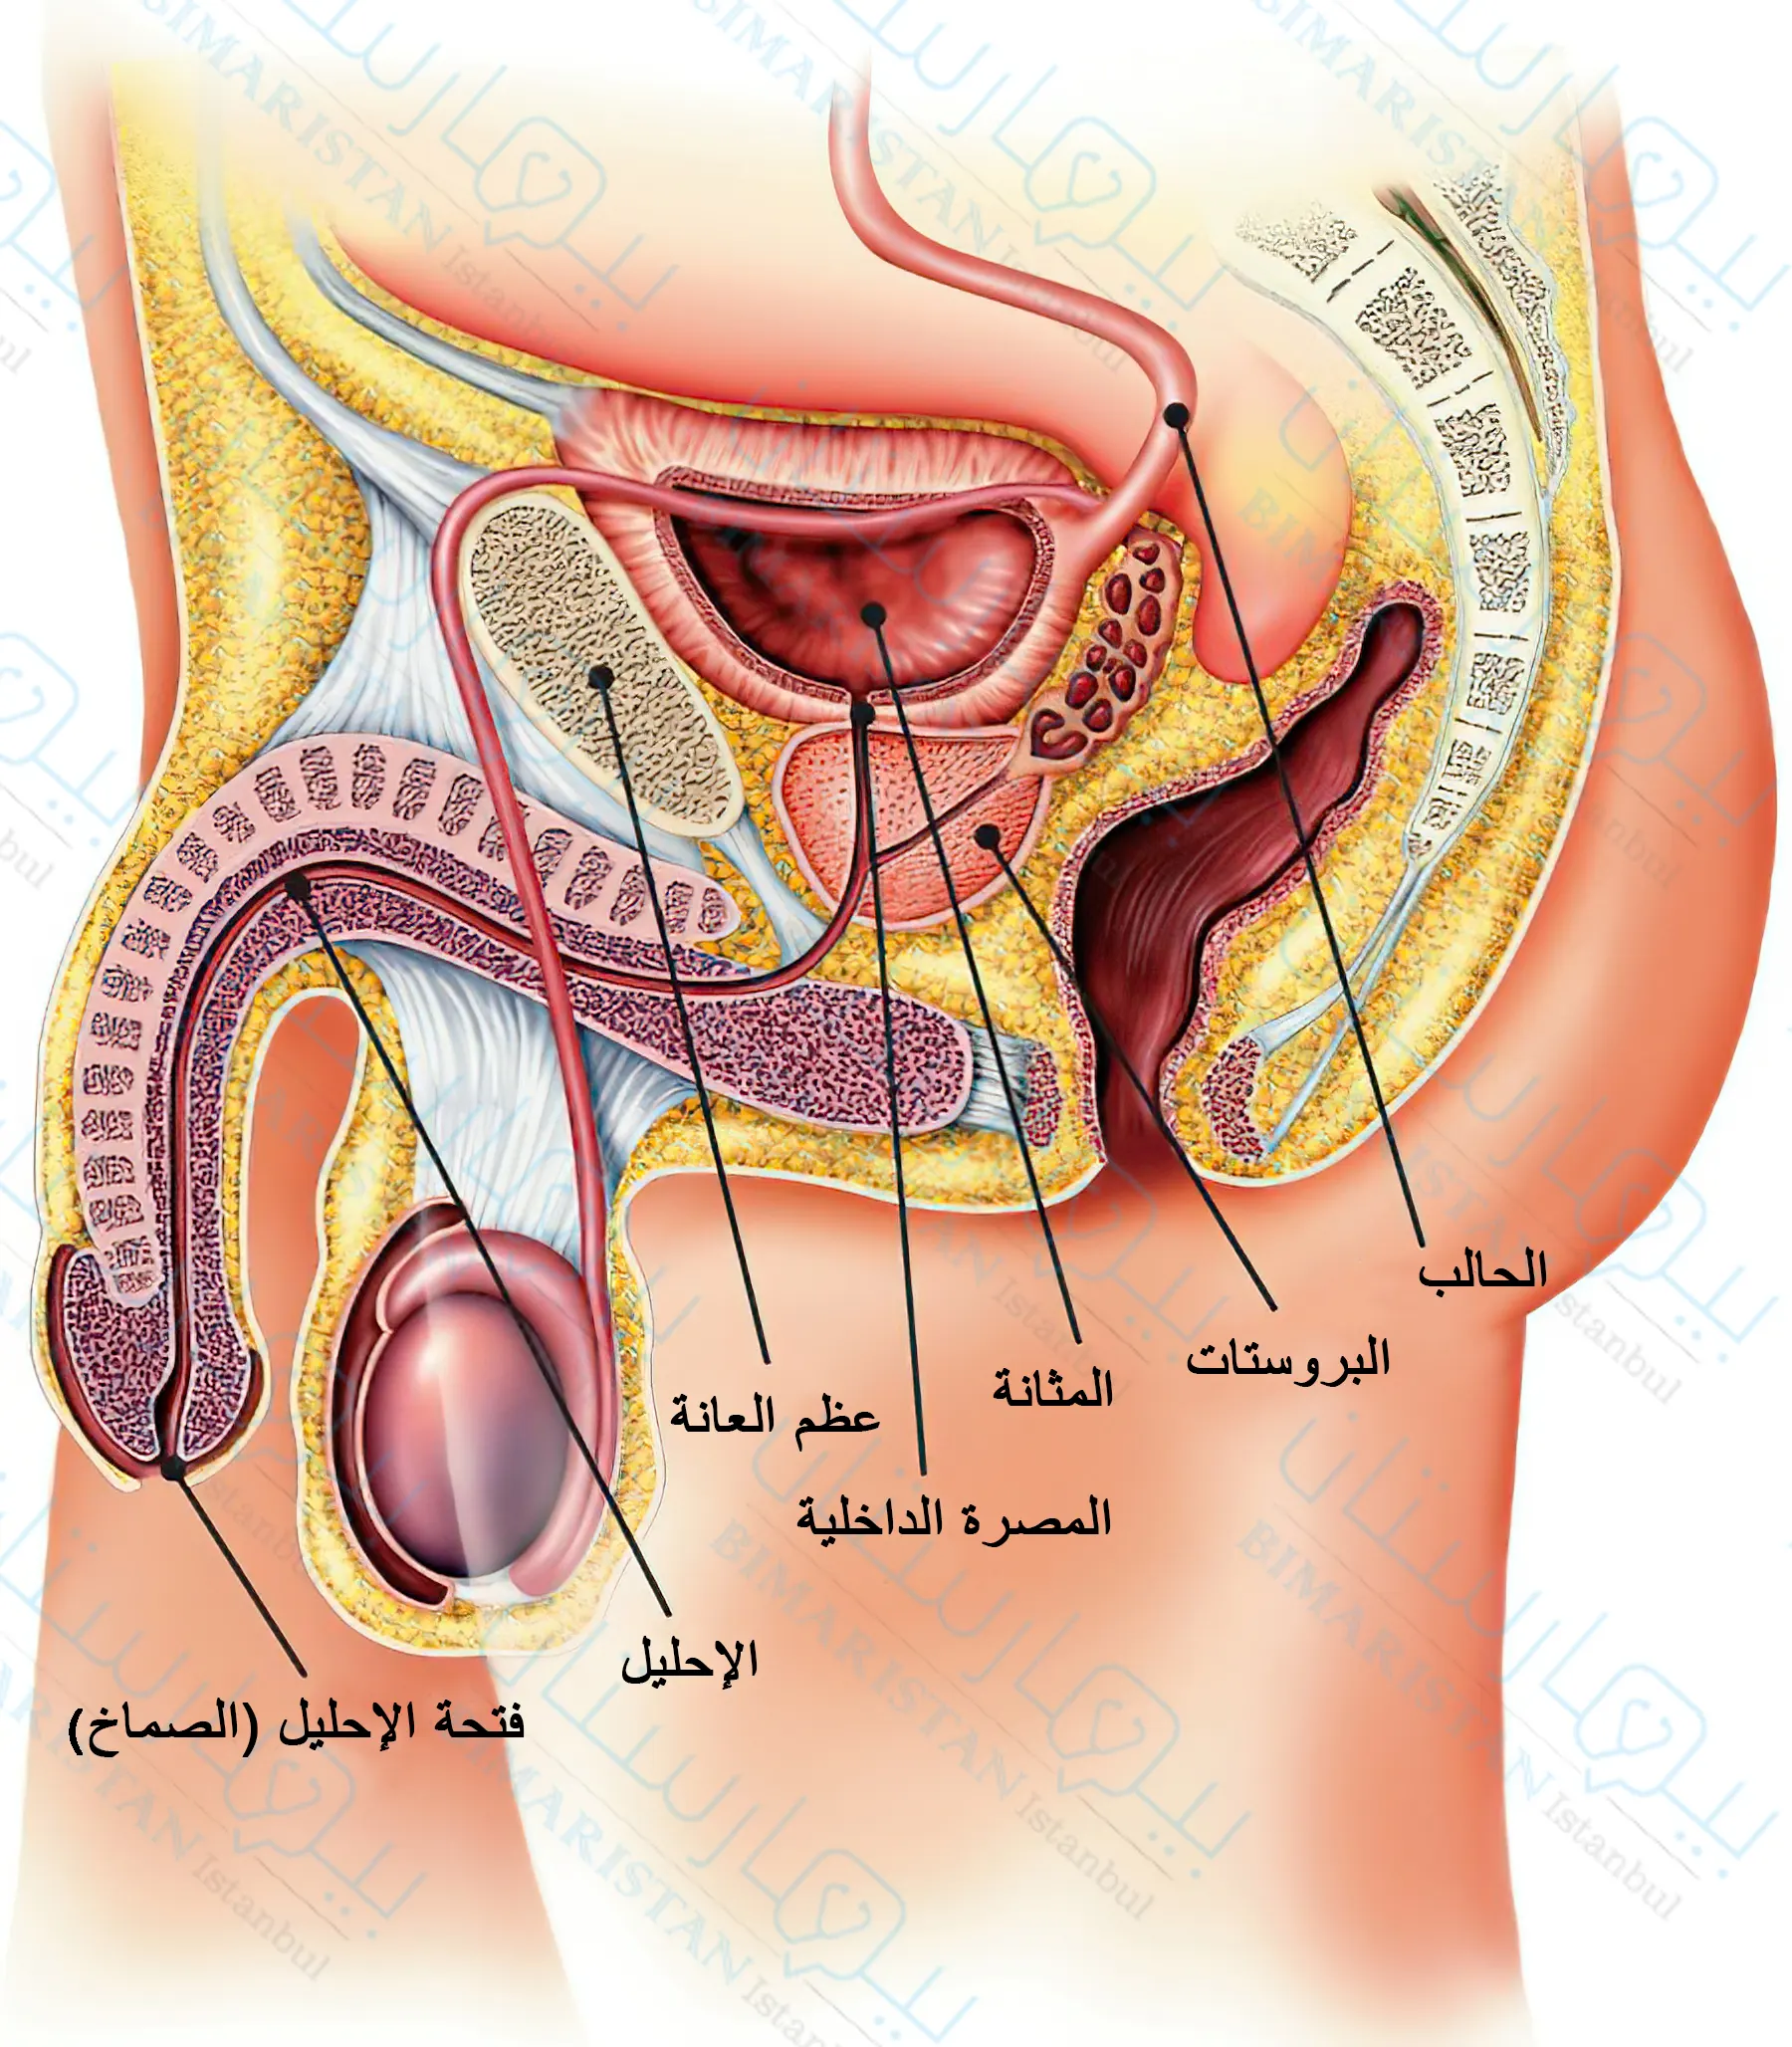 Overview of the anatomy of the male urinary system